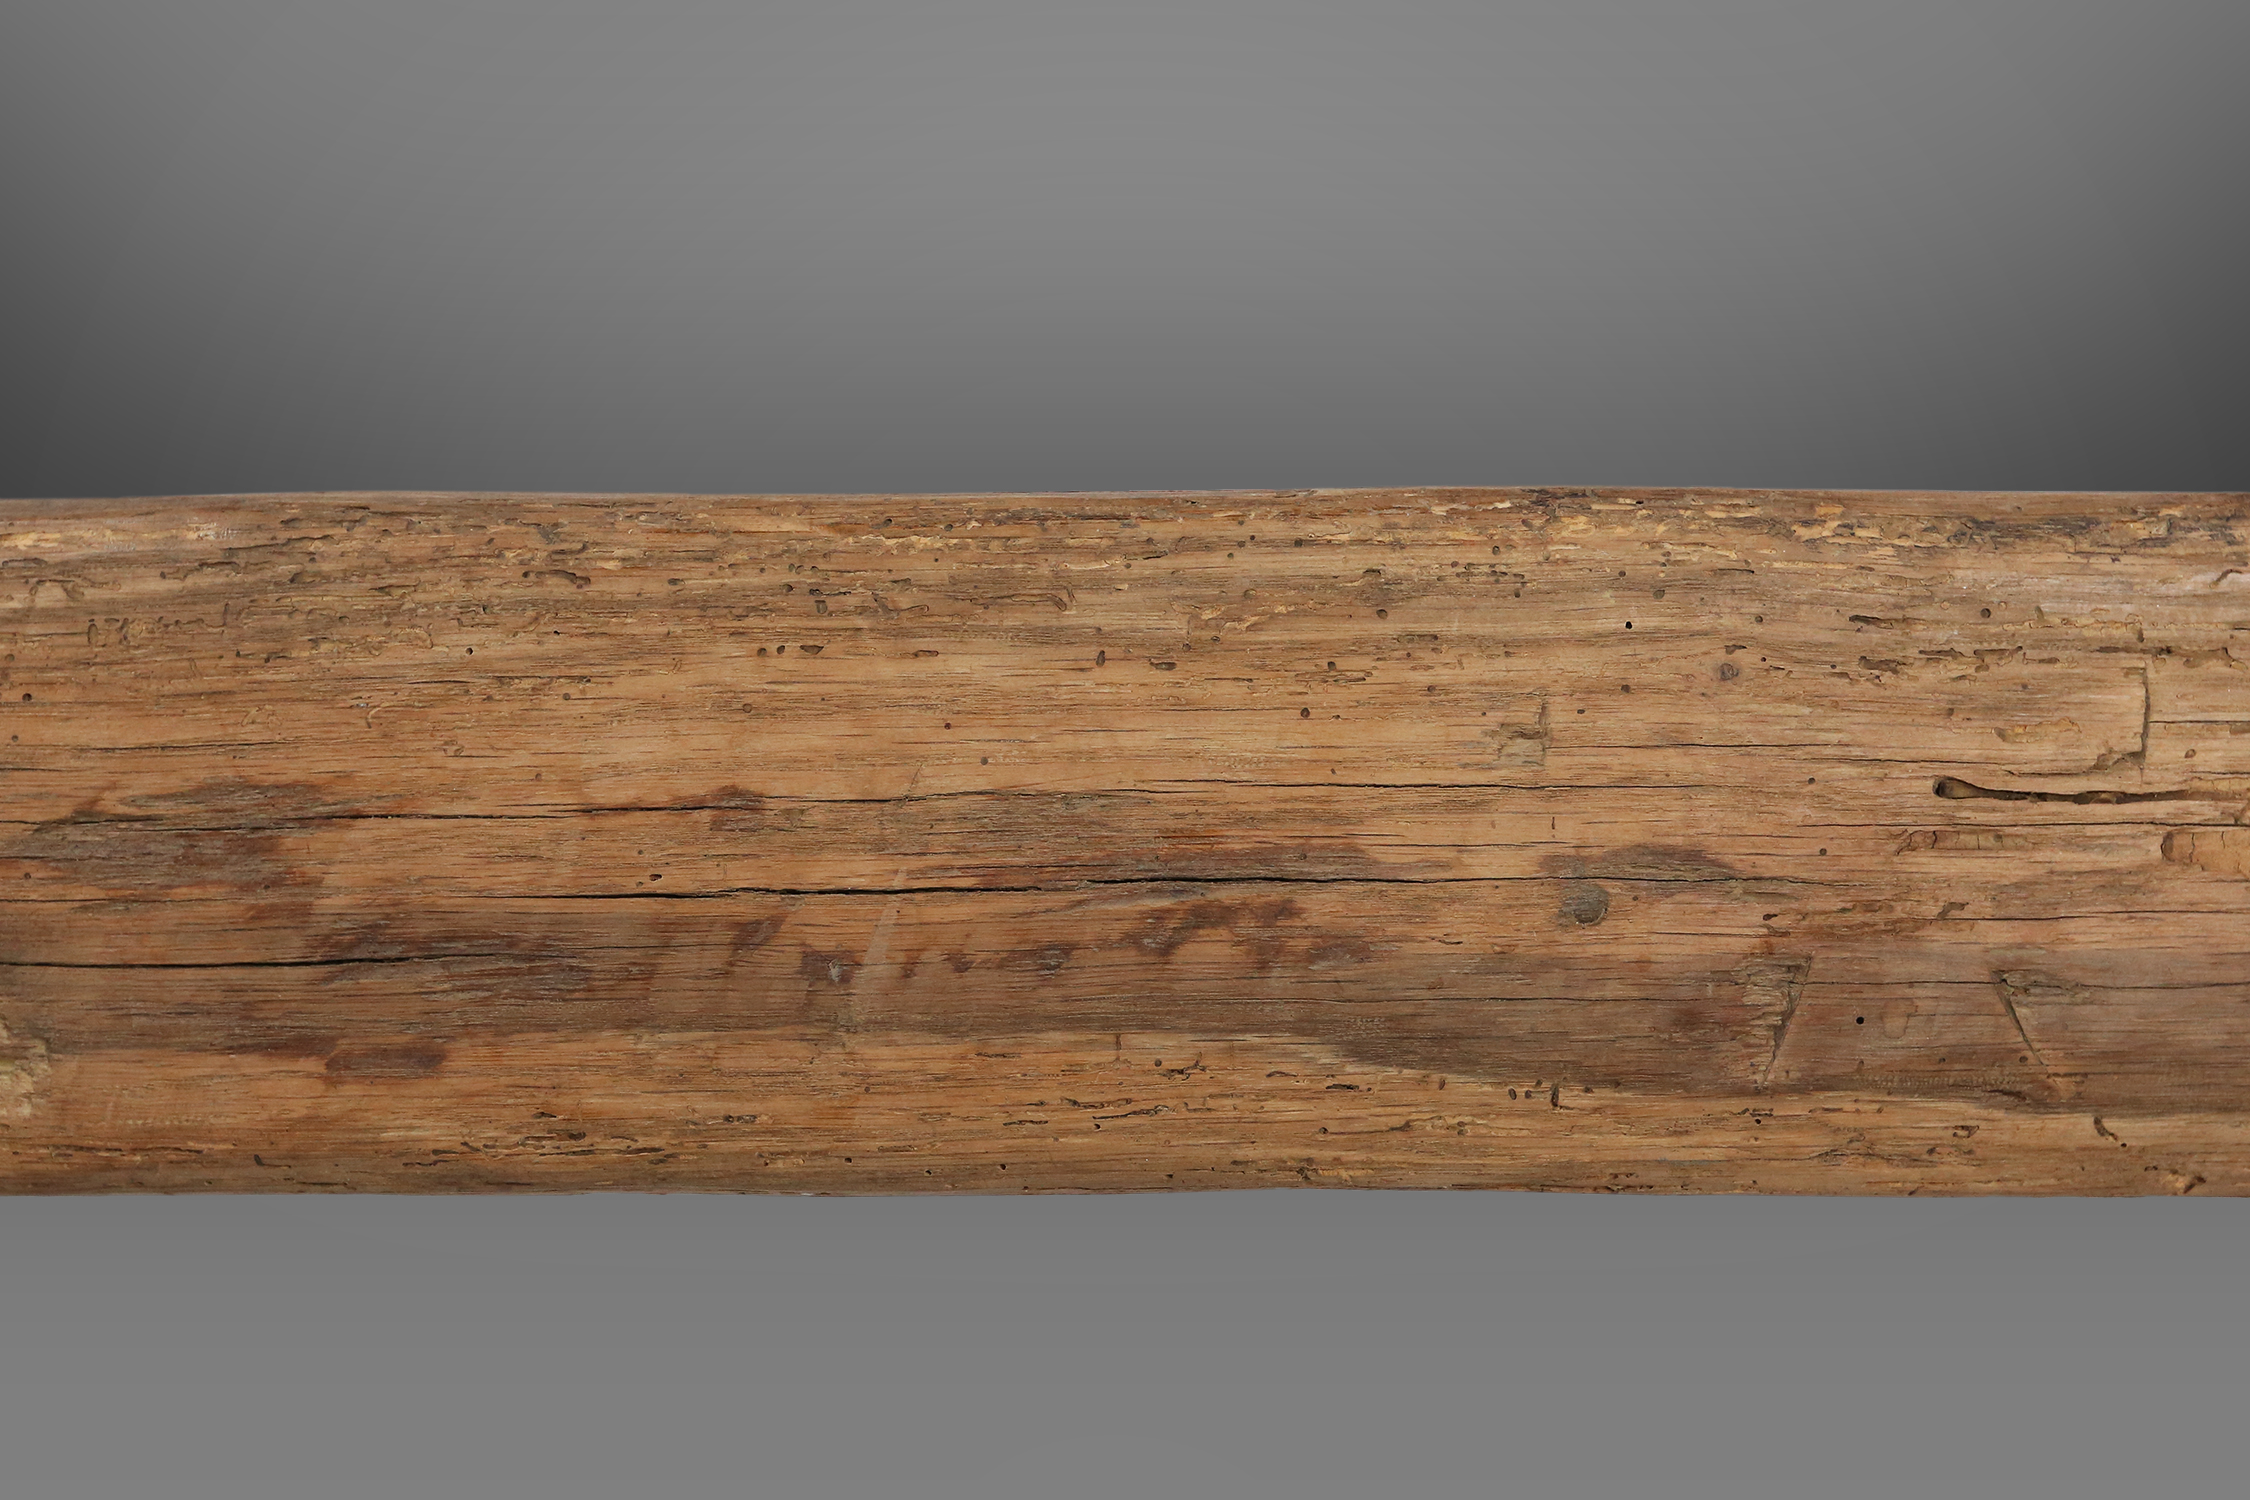 Rustic Tree Trunk Bench, France, 1850sthumbnail